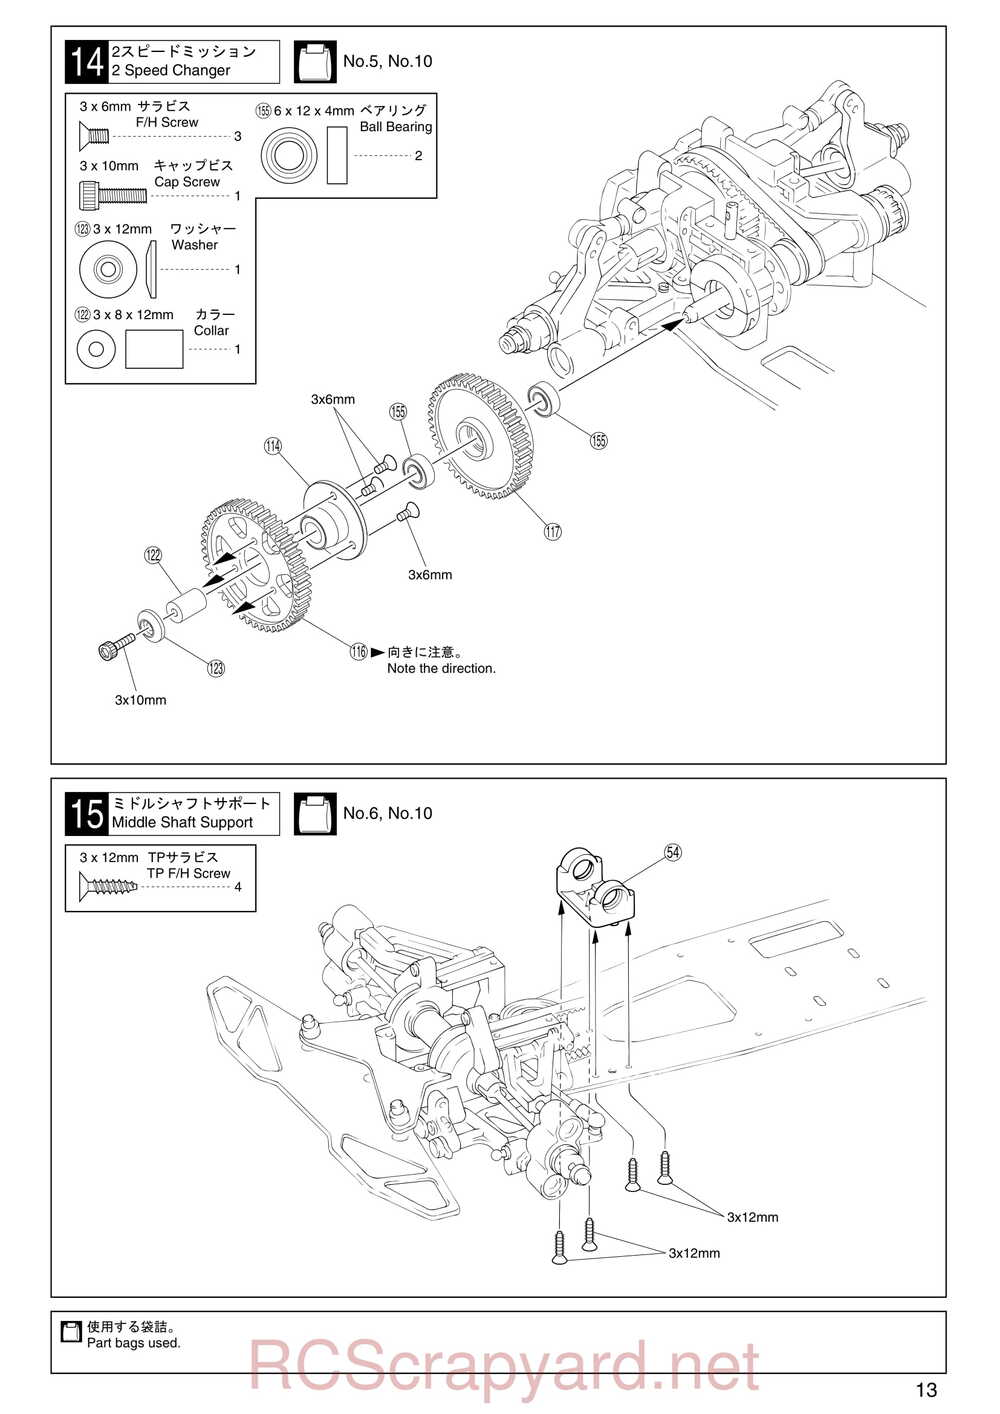 Kyosho - 31102 - V-One RR - Manual - Page 13